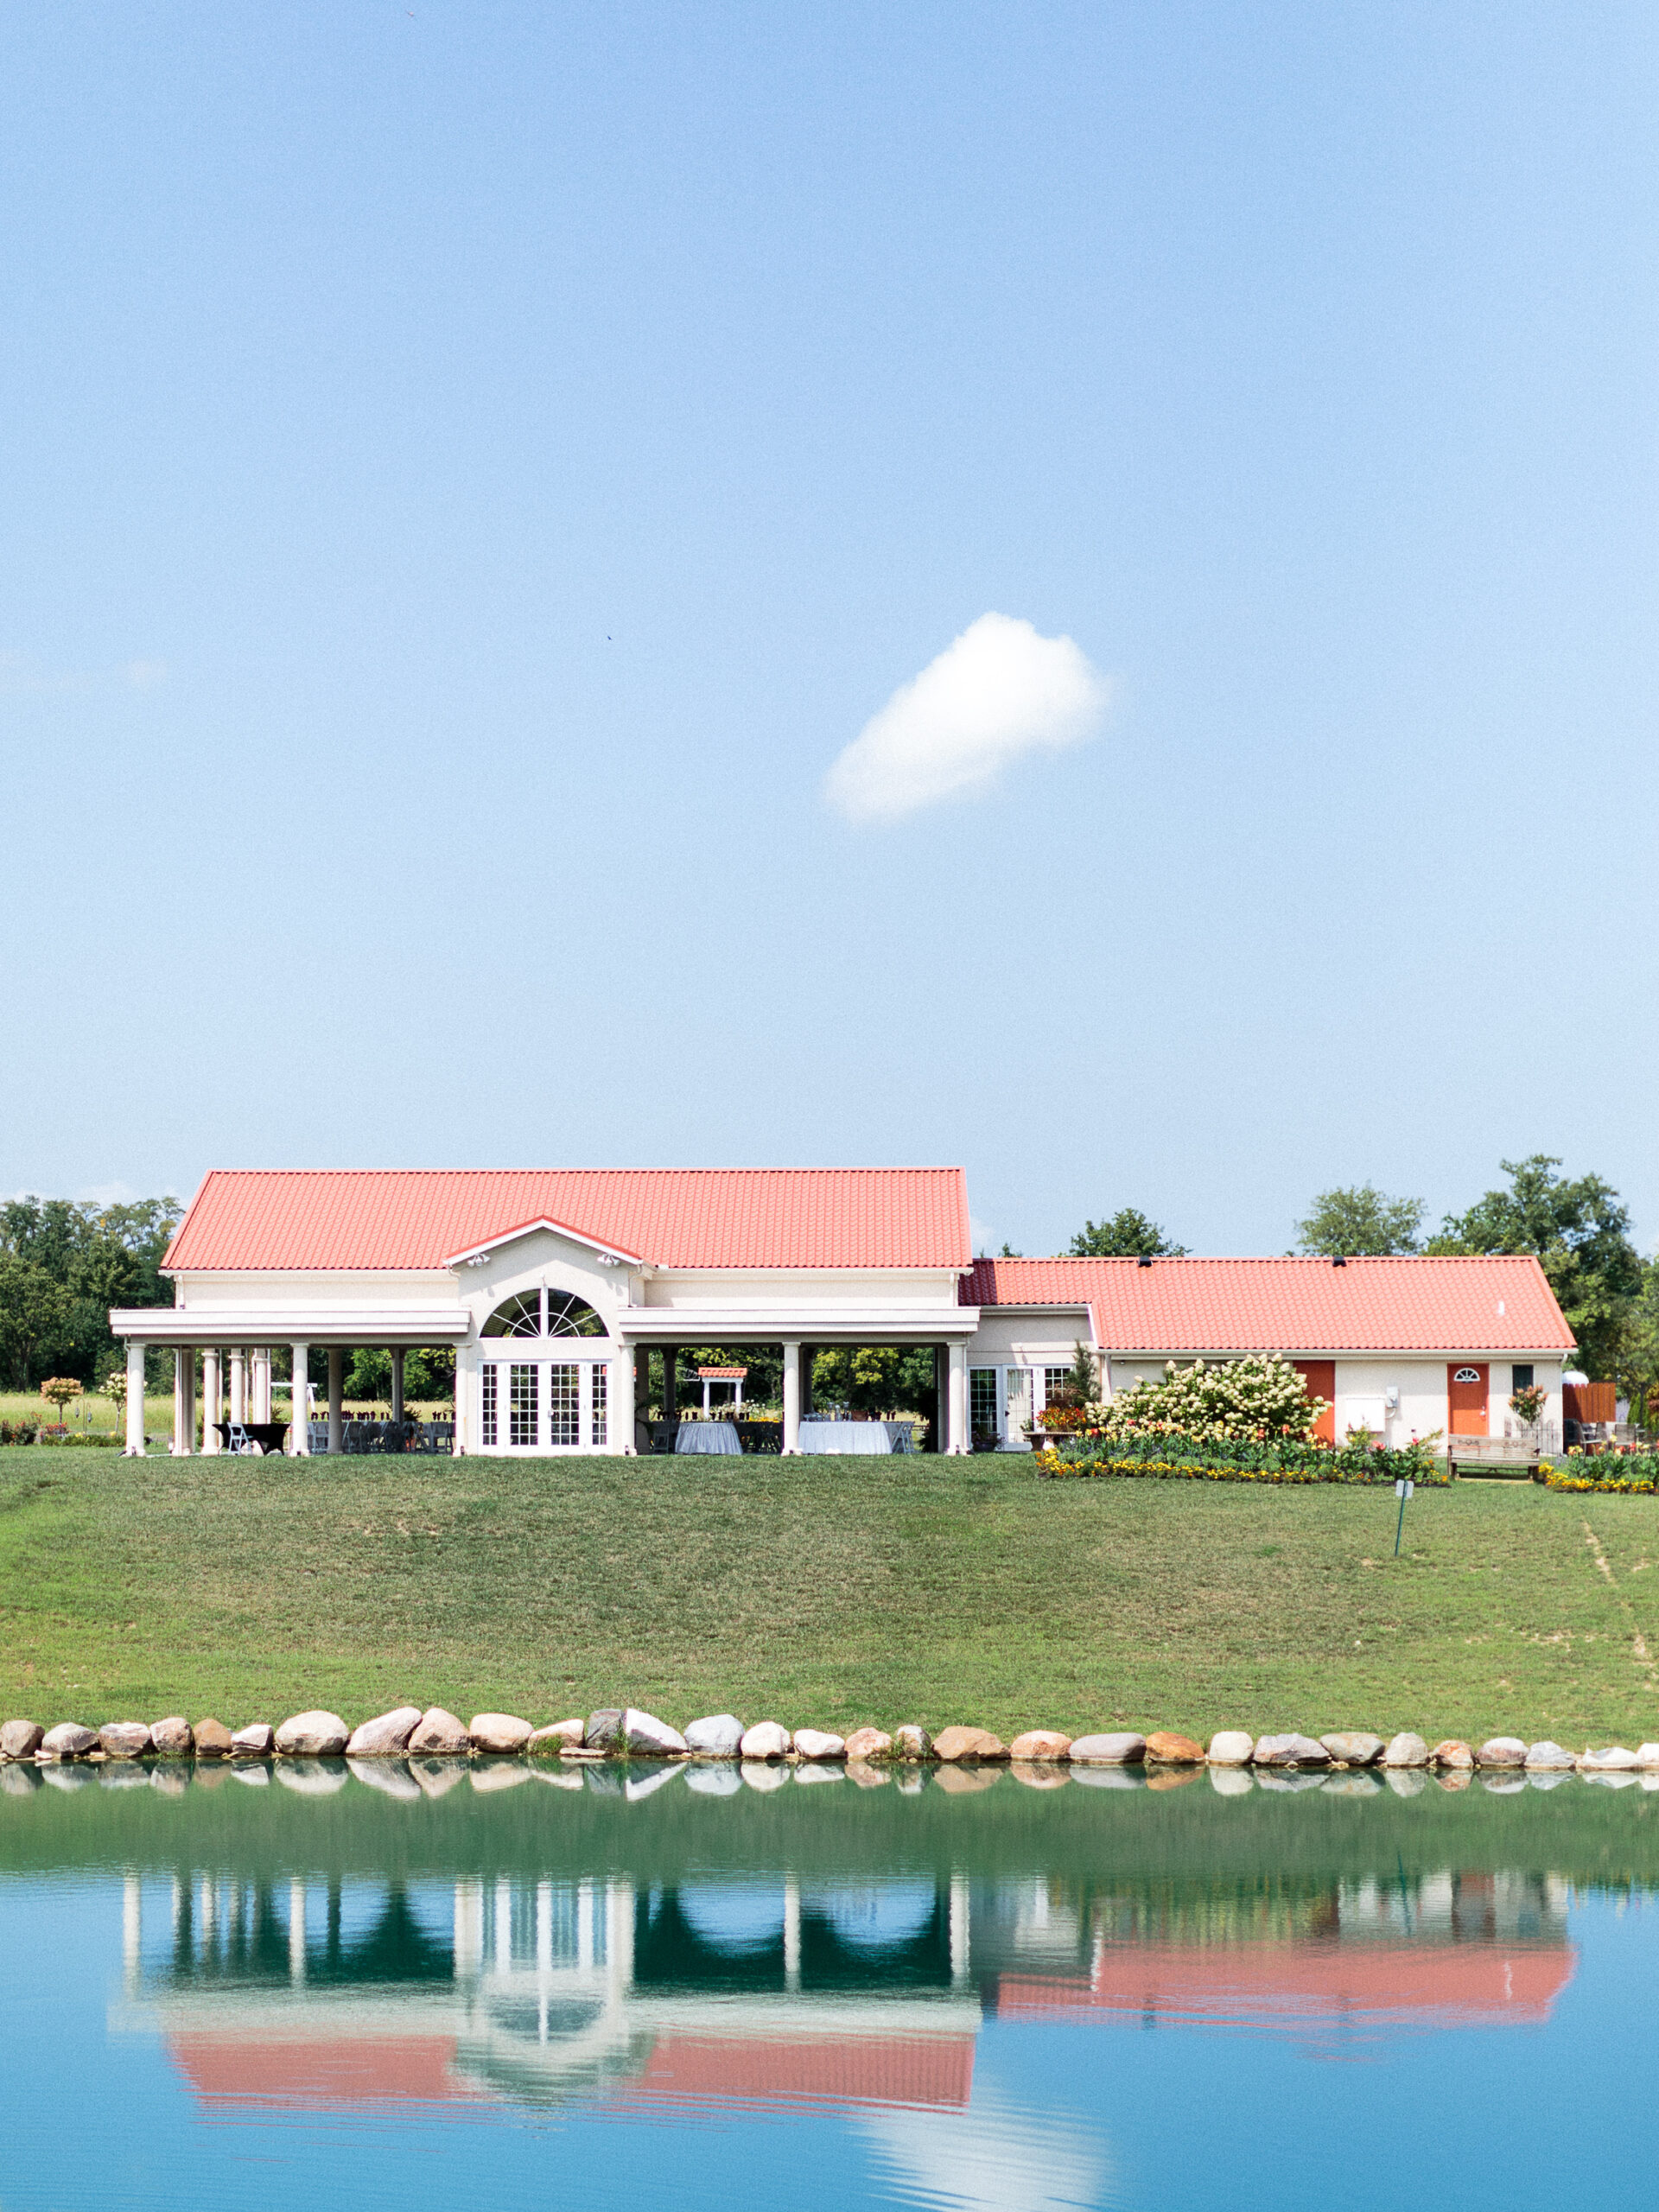 Mediterranean italian style wedding venue positioned in front of tropical blue pond